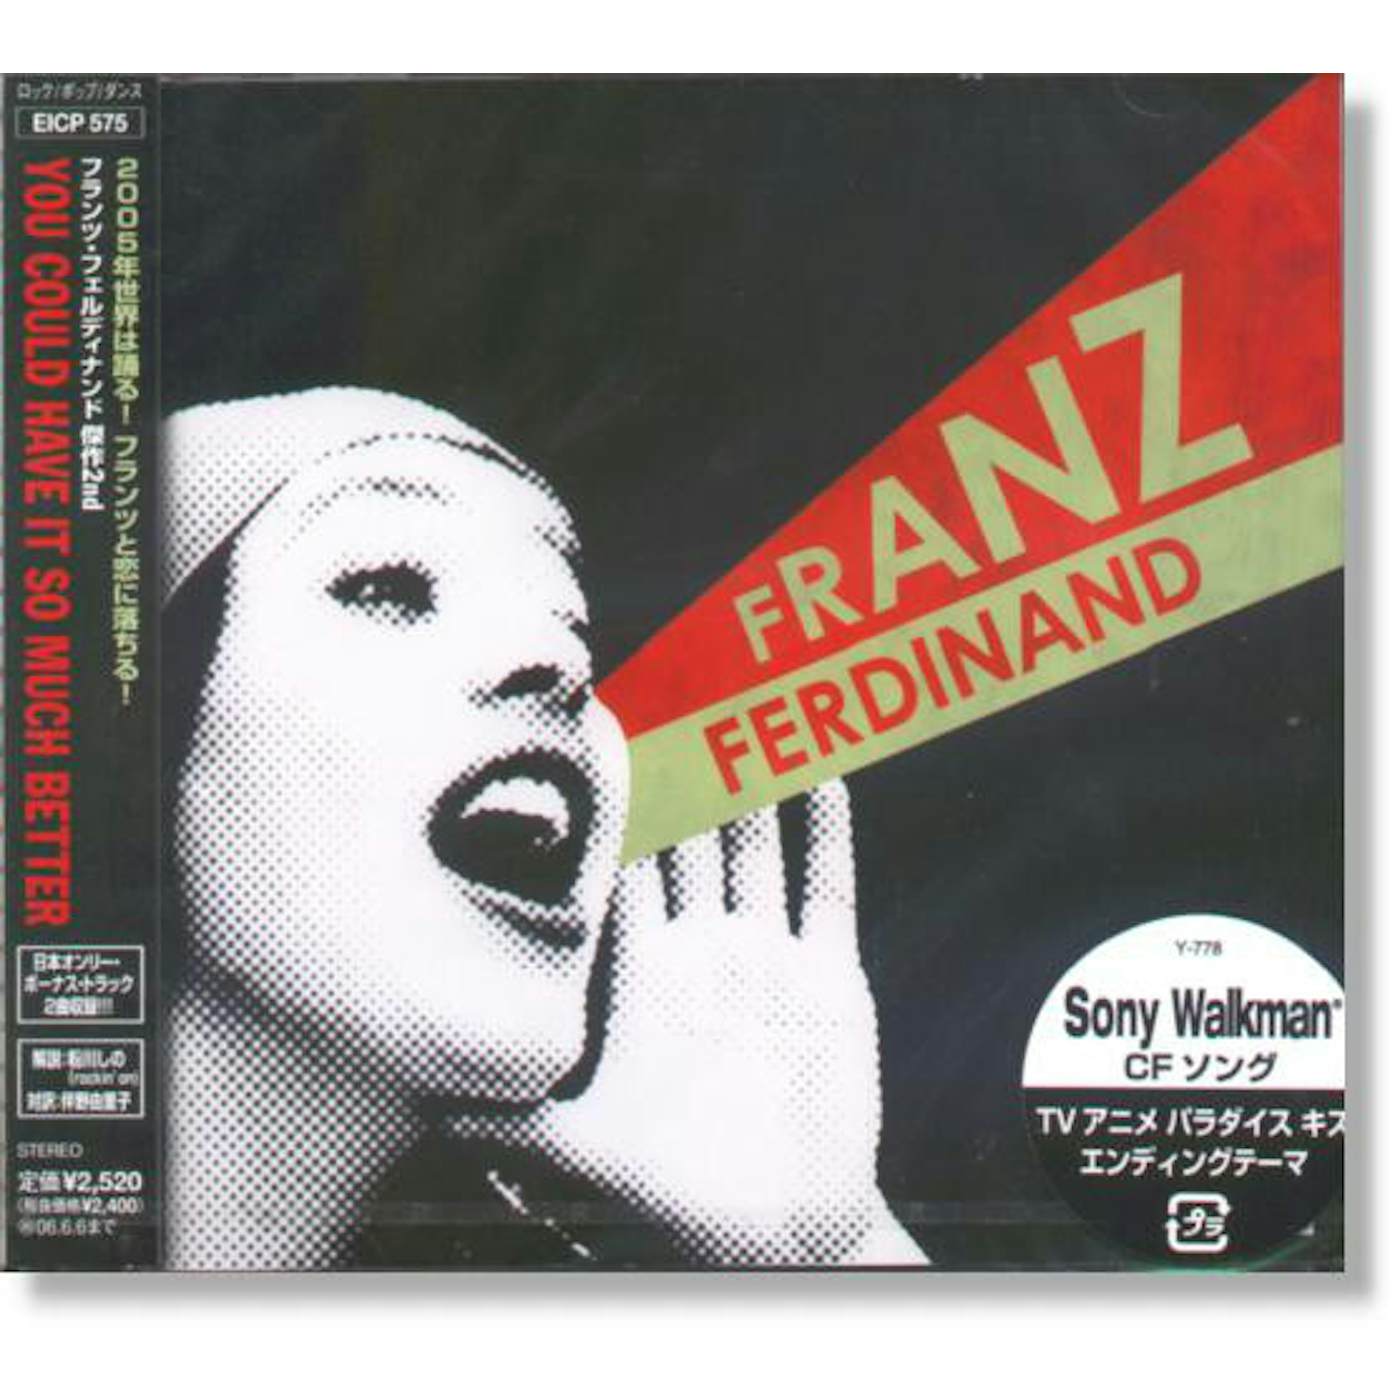 Franz Ferdinand YOU COULD HAVE IT CD